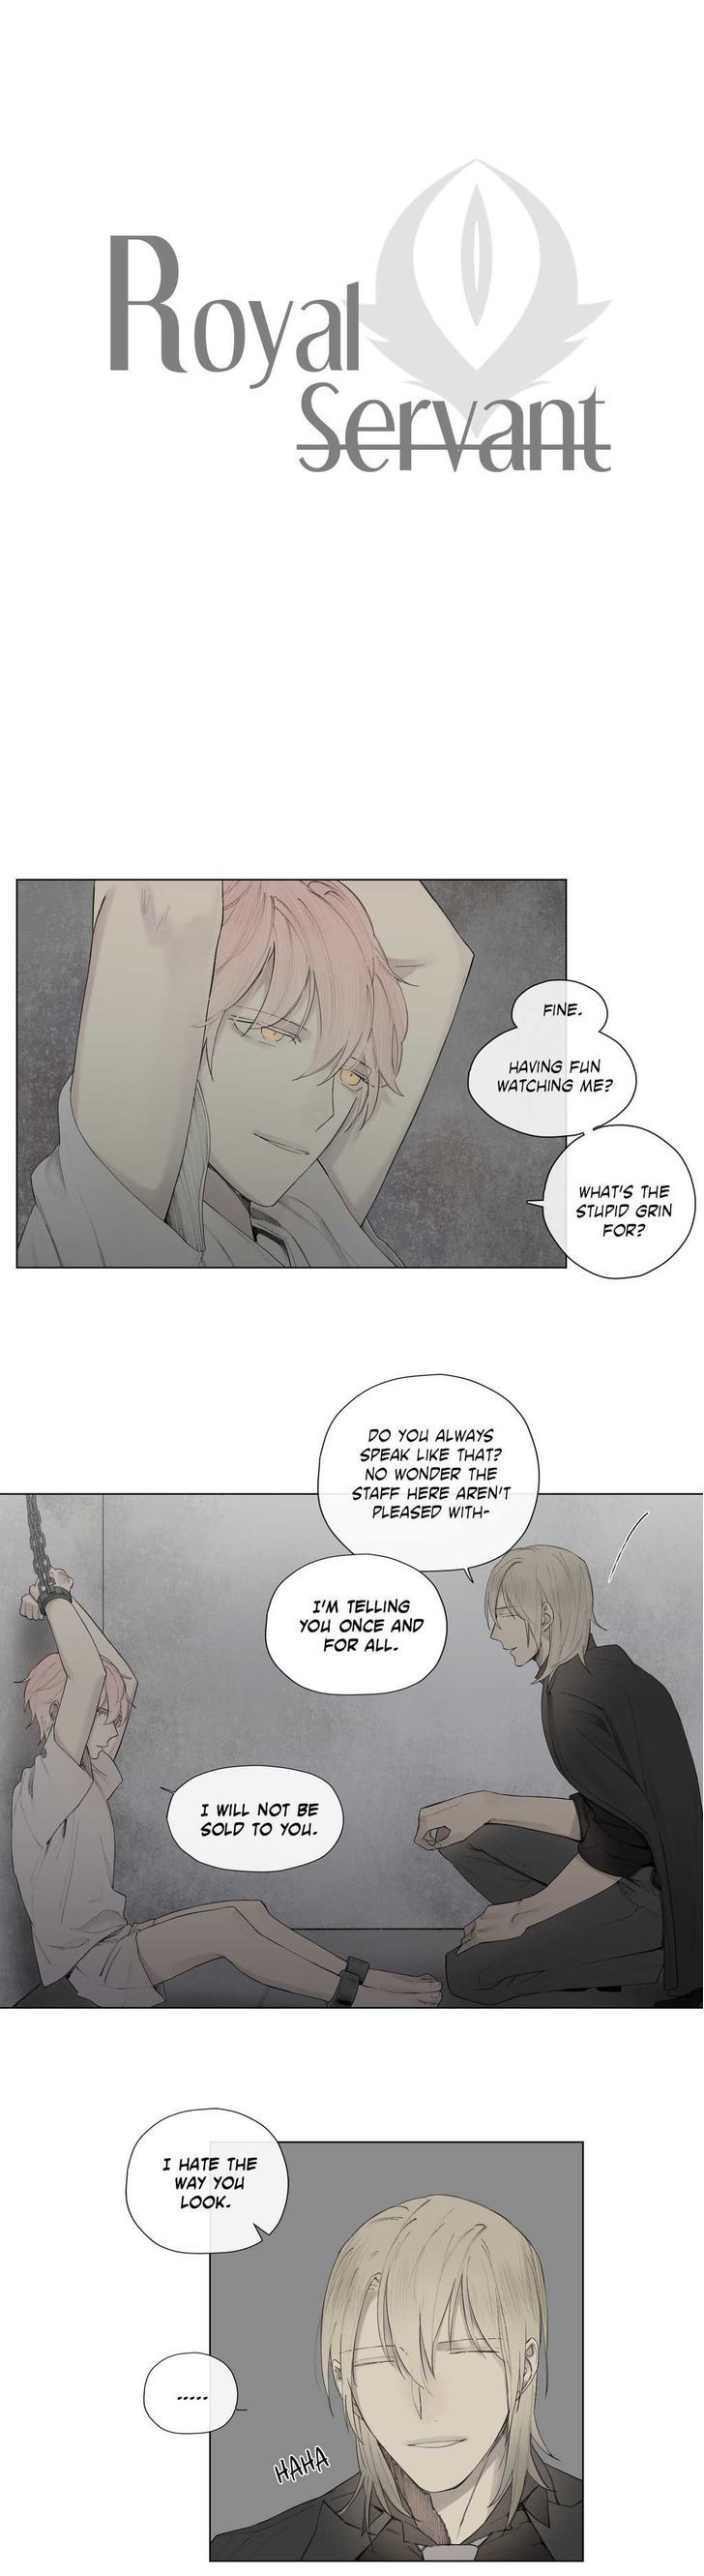 Royal Servant - Chapter 20 Page 7